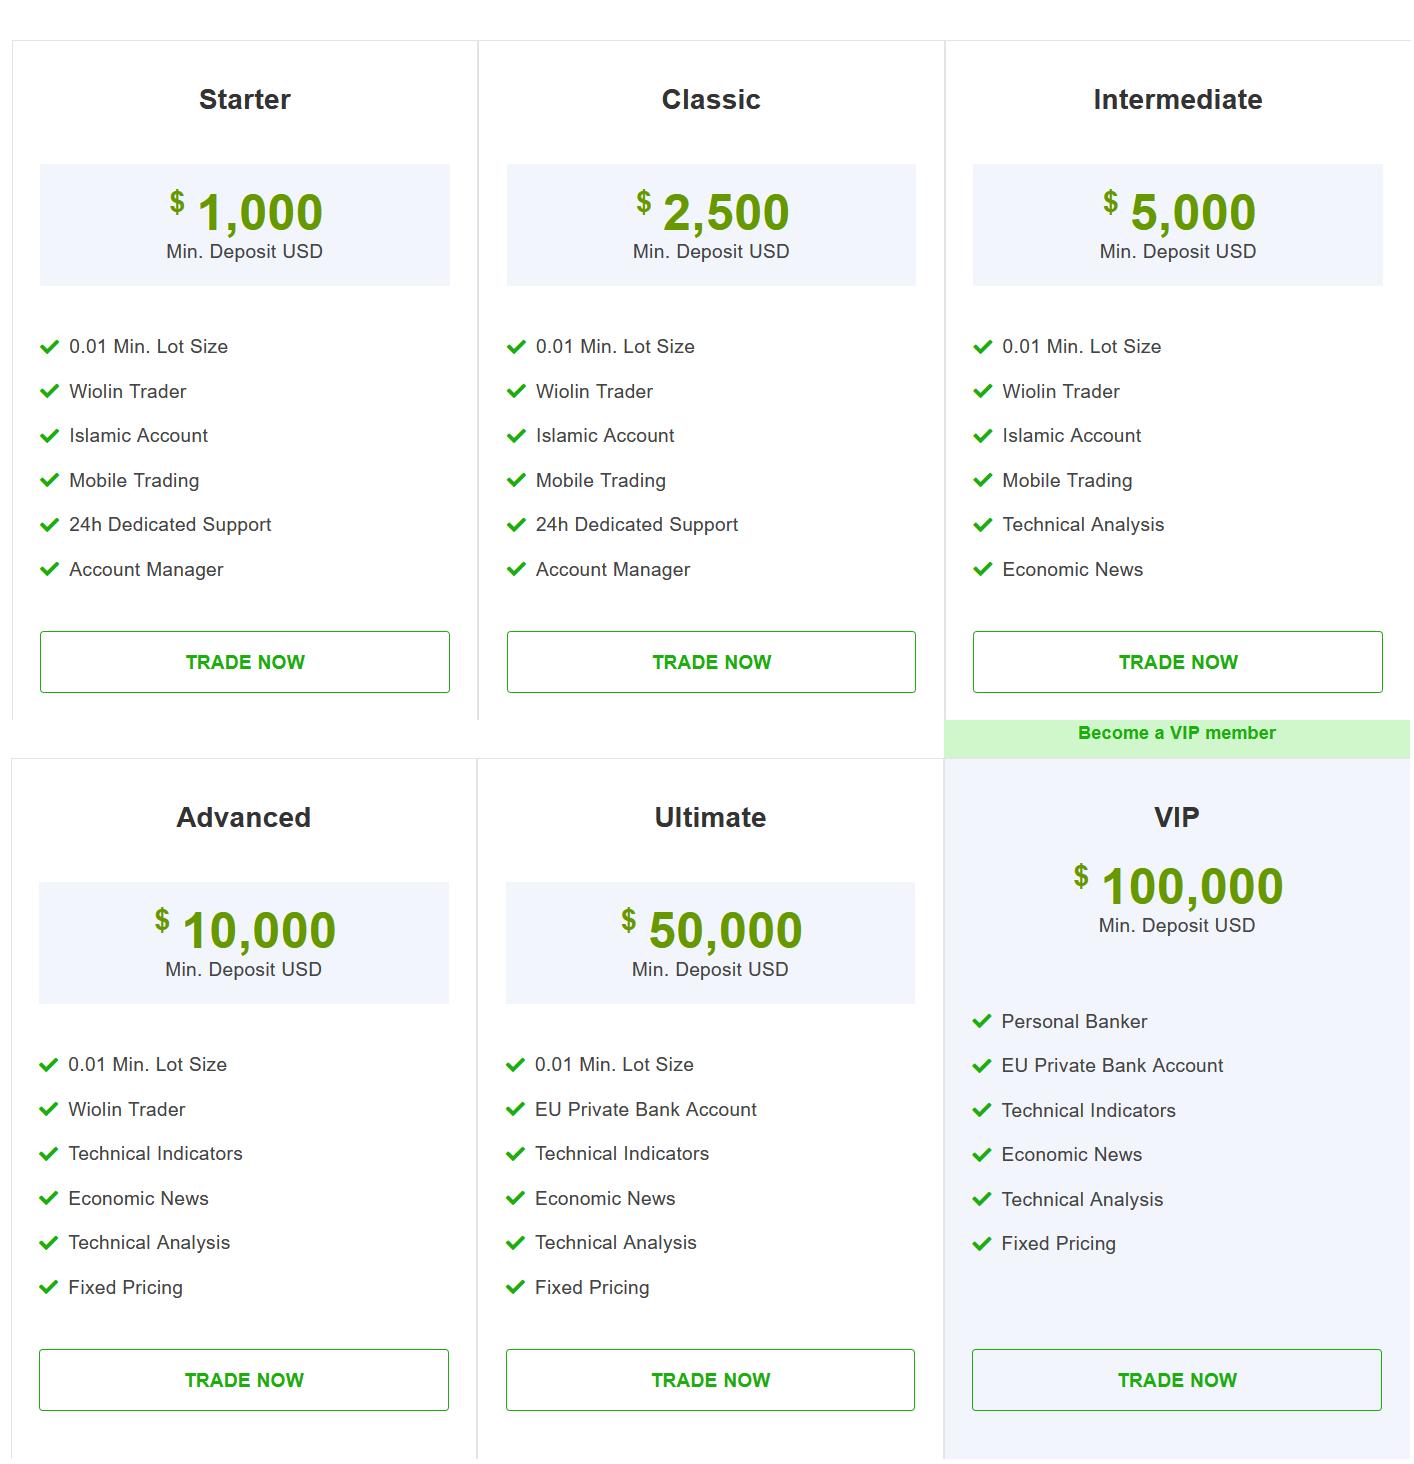 Account Tiering Wiolin: An image displaying a brokerage's tiered account offerings, including Starter ($1,000), Classic ($2,500), Intermediate ($5,000), Advanced ($10,000), Ultimate ($50,000), and VIP ($100,000) accounts. Each tier lists specific features such as minimum lot size, mobile trading, and technical analysis, with more advanced features like a personal banker and EU private bank account available at higher tiers. Green "Trade Now" buttons suggest a call to action for potential clients, with a highlighted option to "Become a VIP member" for the highest tier.